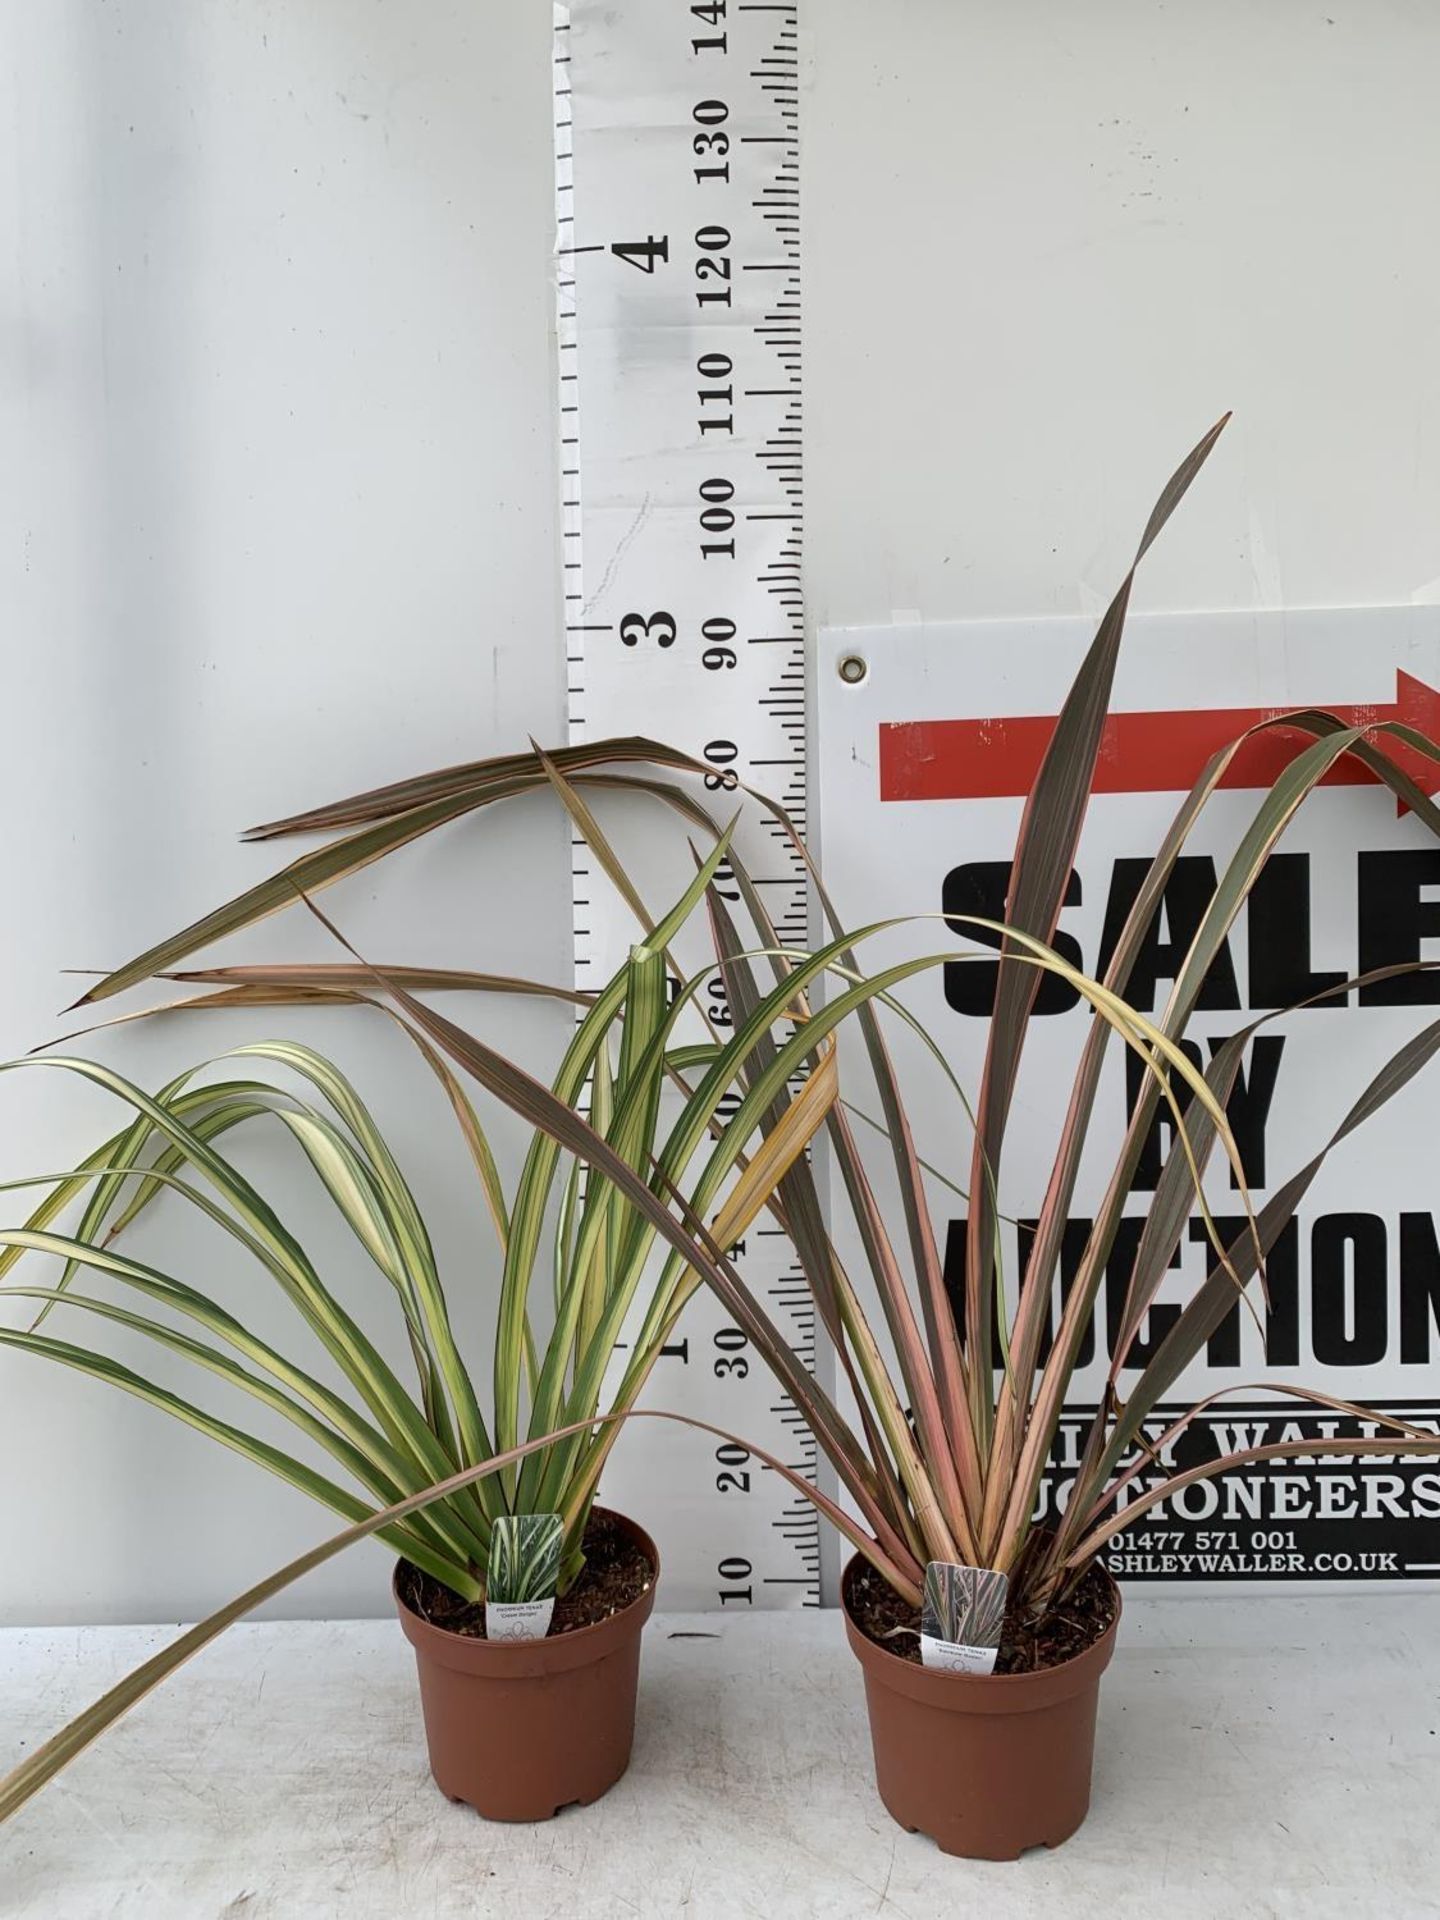 TWO PHORMIUM TENAX 'RAINBOW QUEEN' IN 3 LTR POTS APPROX 1M IN HEIGHT PLUS VAT TO BE SOLD FOR THE TWO - Image 2 of 12